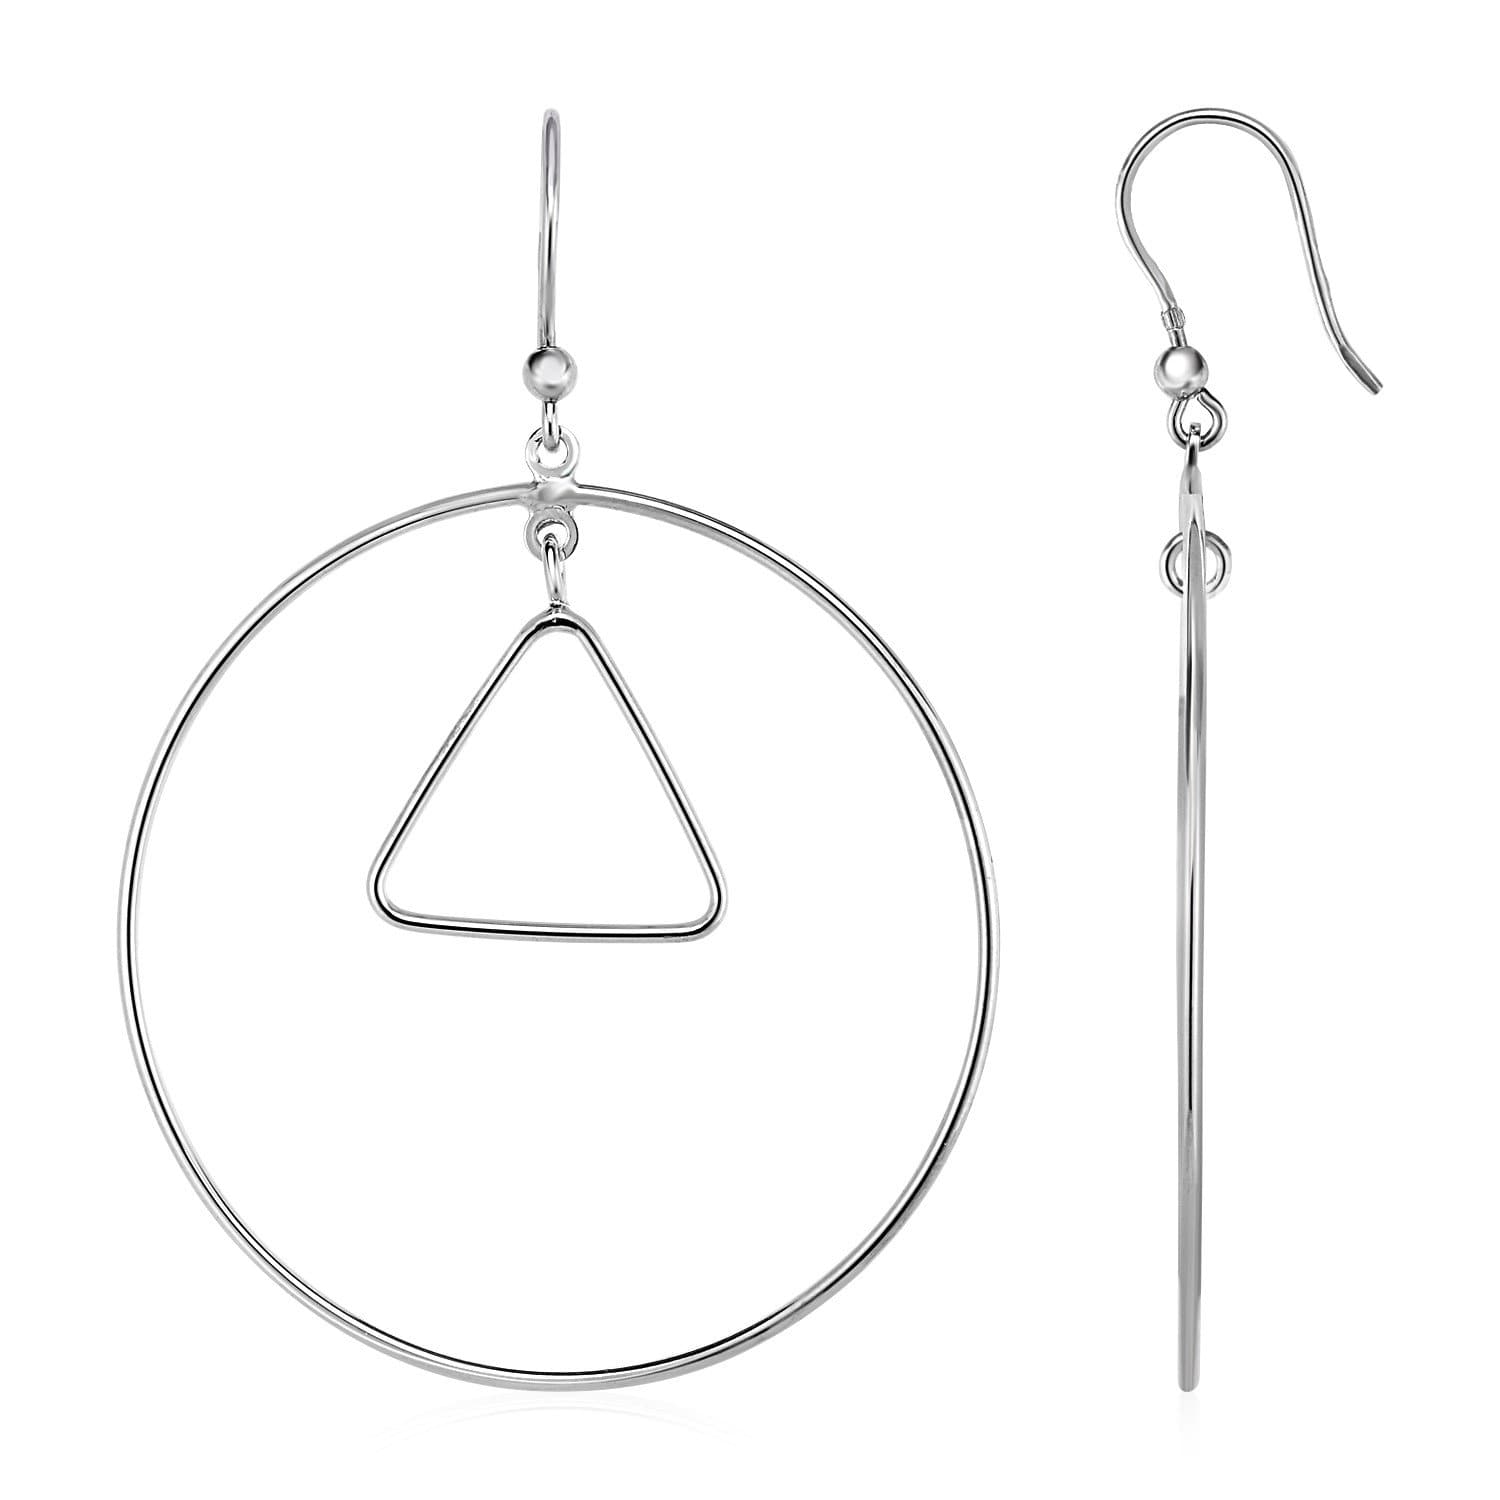 Earrings with Polished Circle and Triangle Drops in Sterling Silver